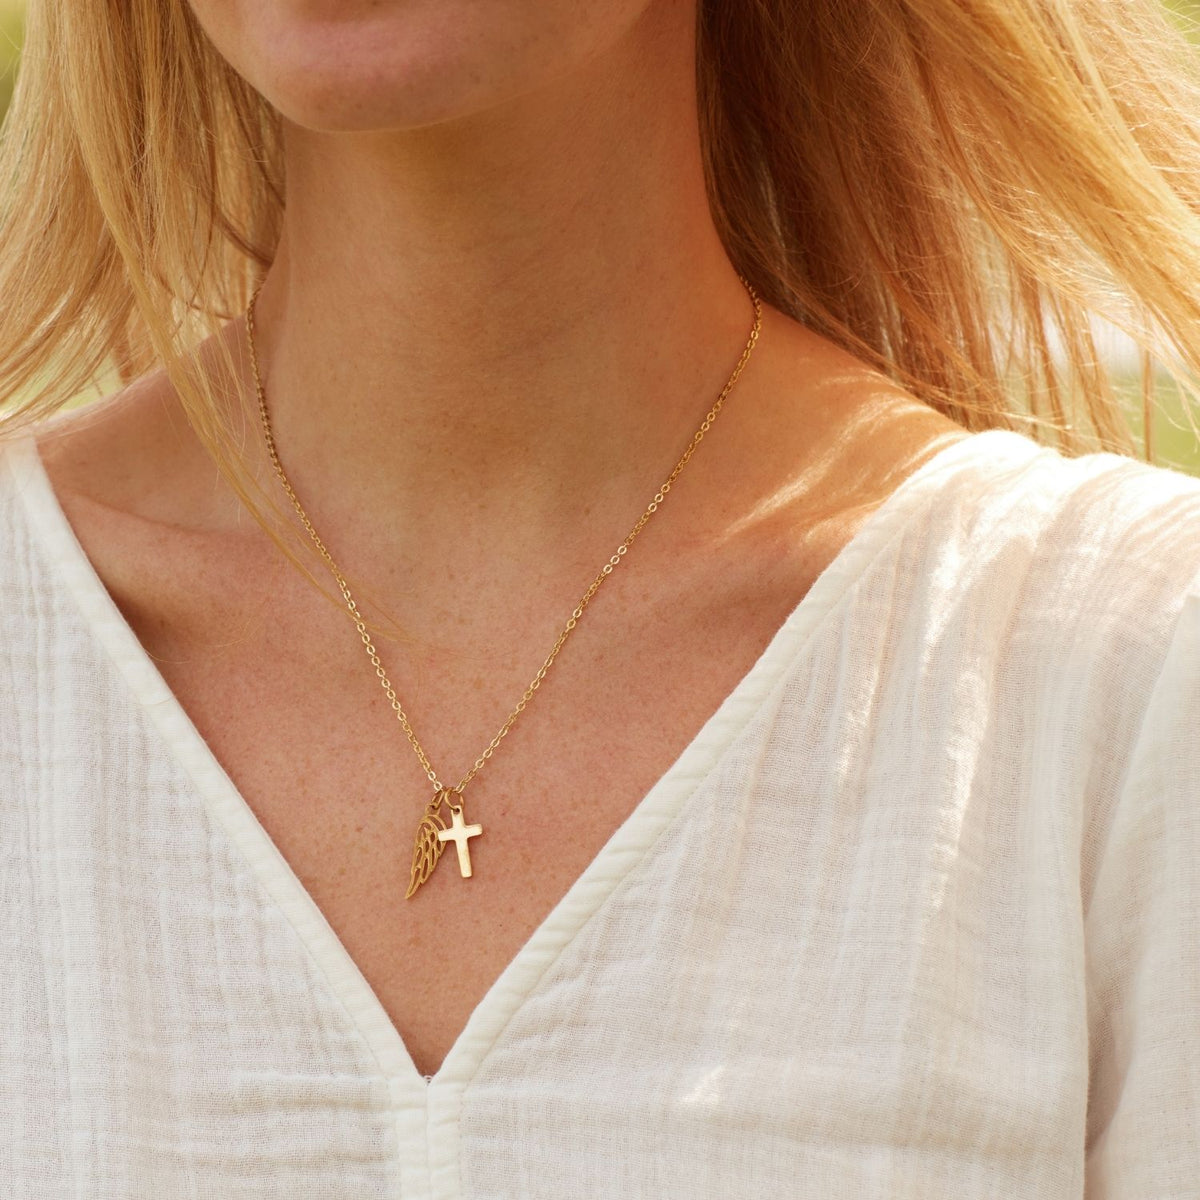 To My Beautiful Goddaughter | Braver, Stronger, Loved | Cross Necklace